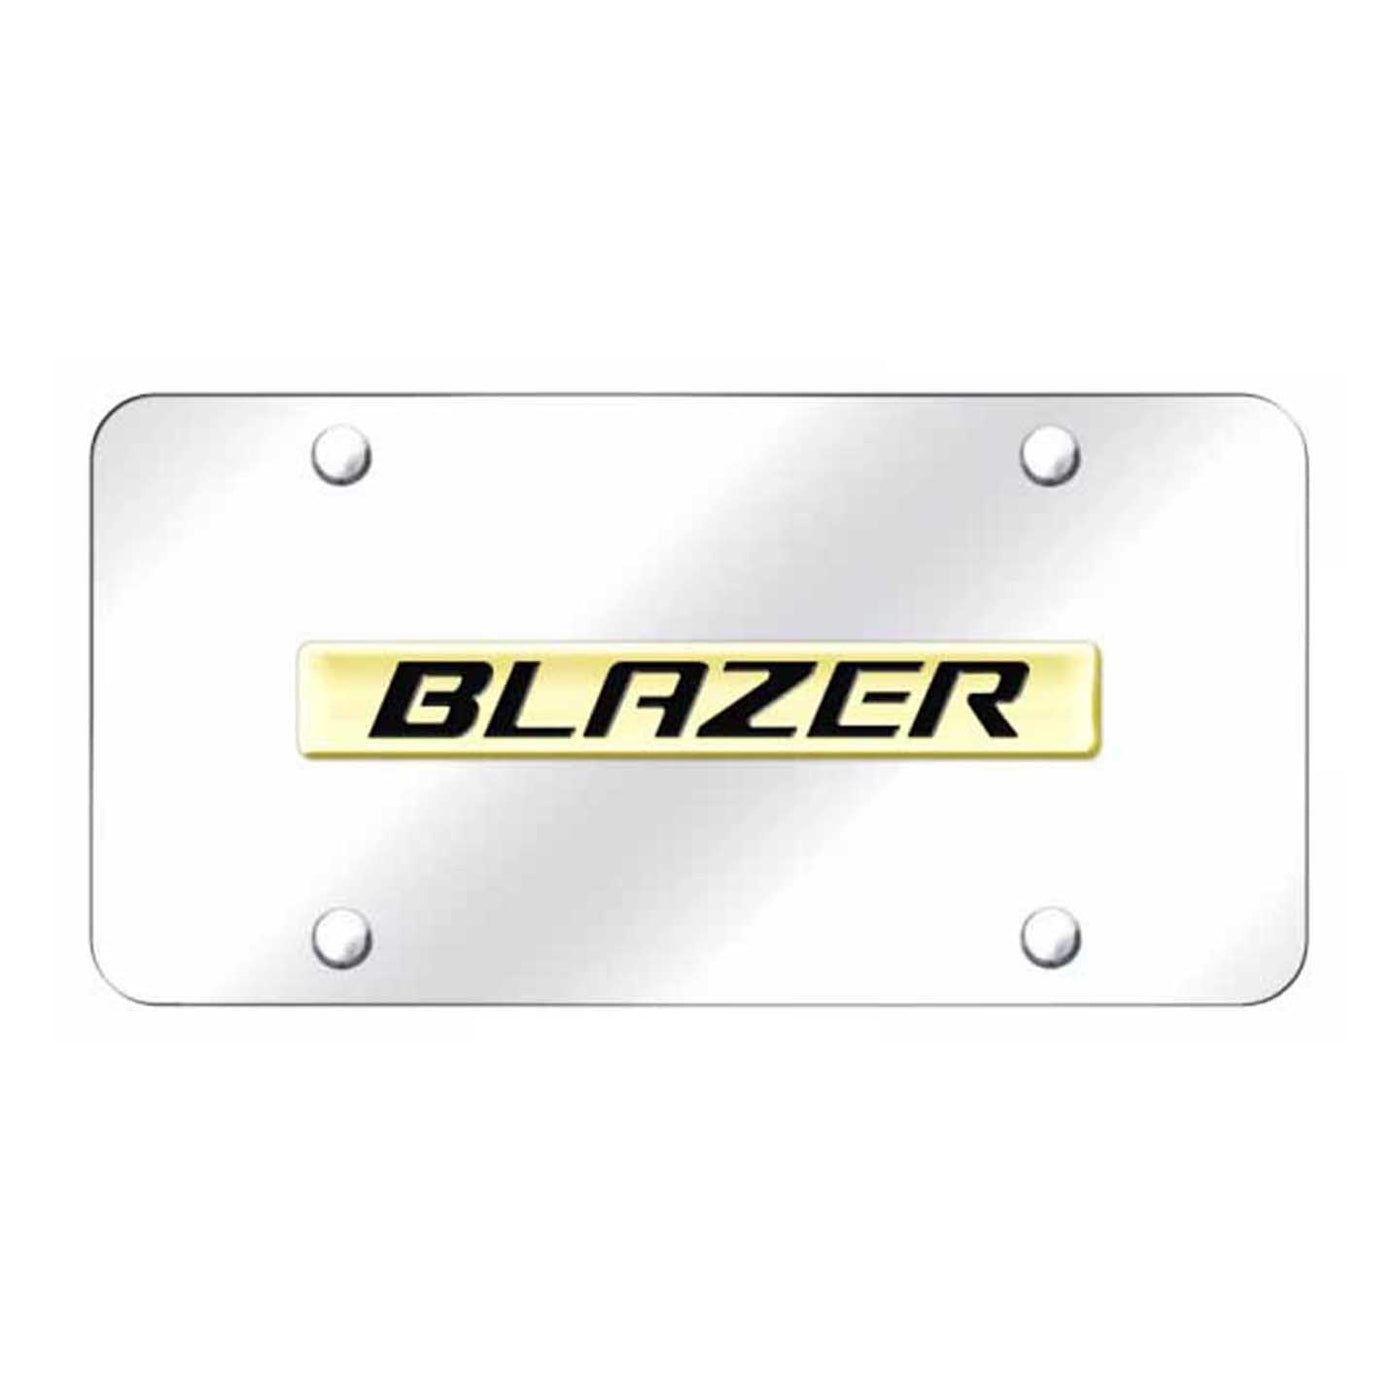 Blazer Name License Plate - Gold on Mirrored